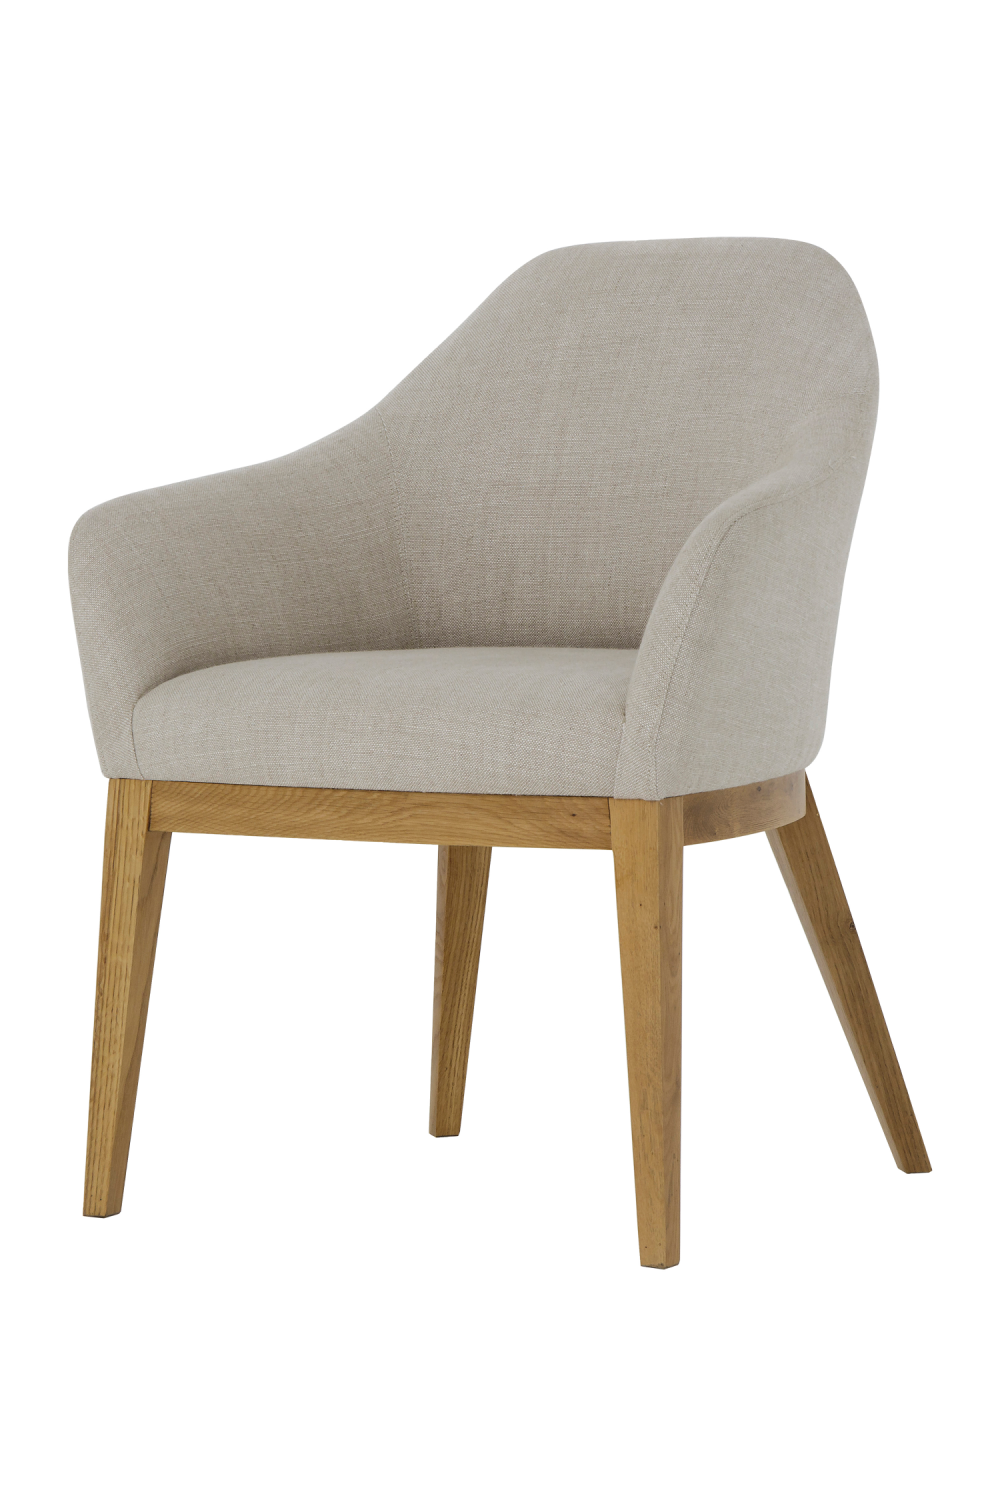 Oatmeal Upholstery Dining Armchair | Andrew Martin Emerson | OROA